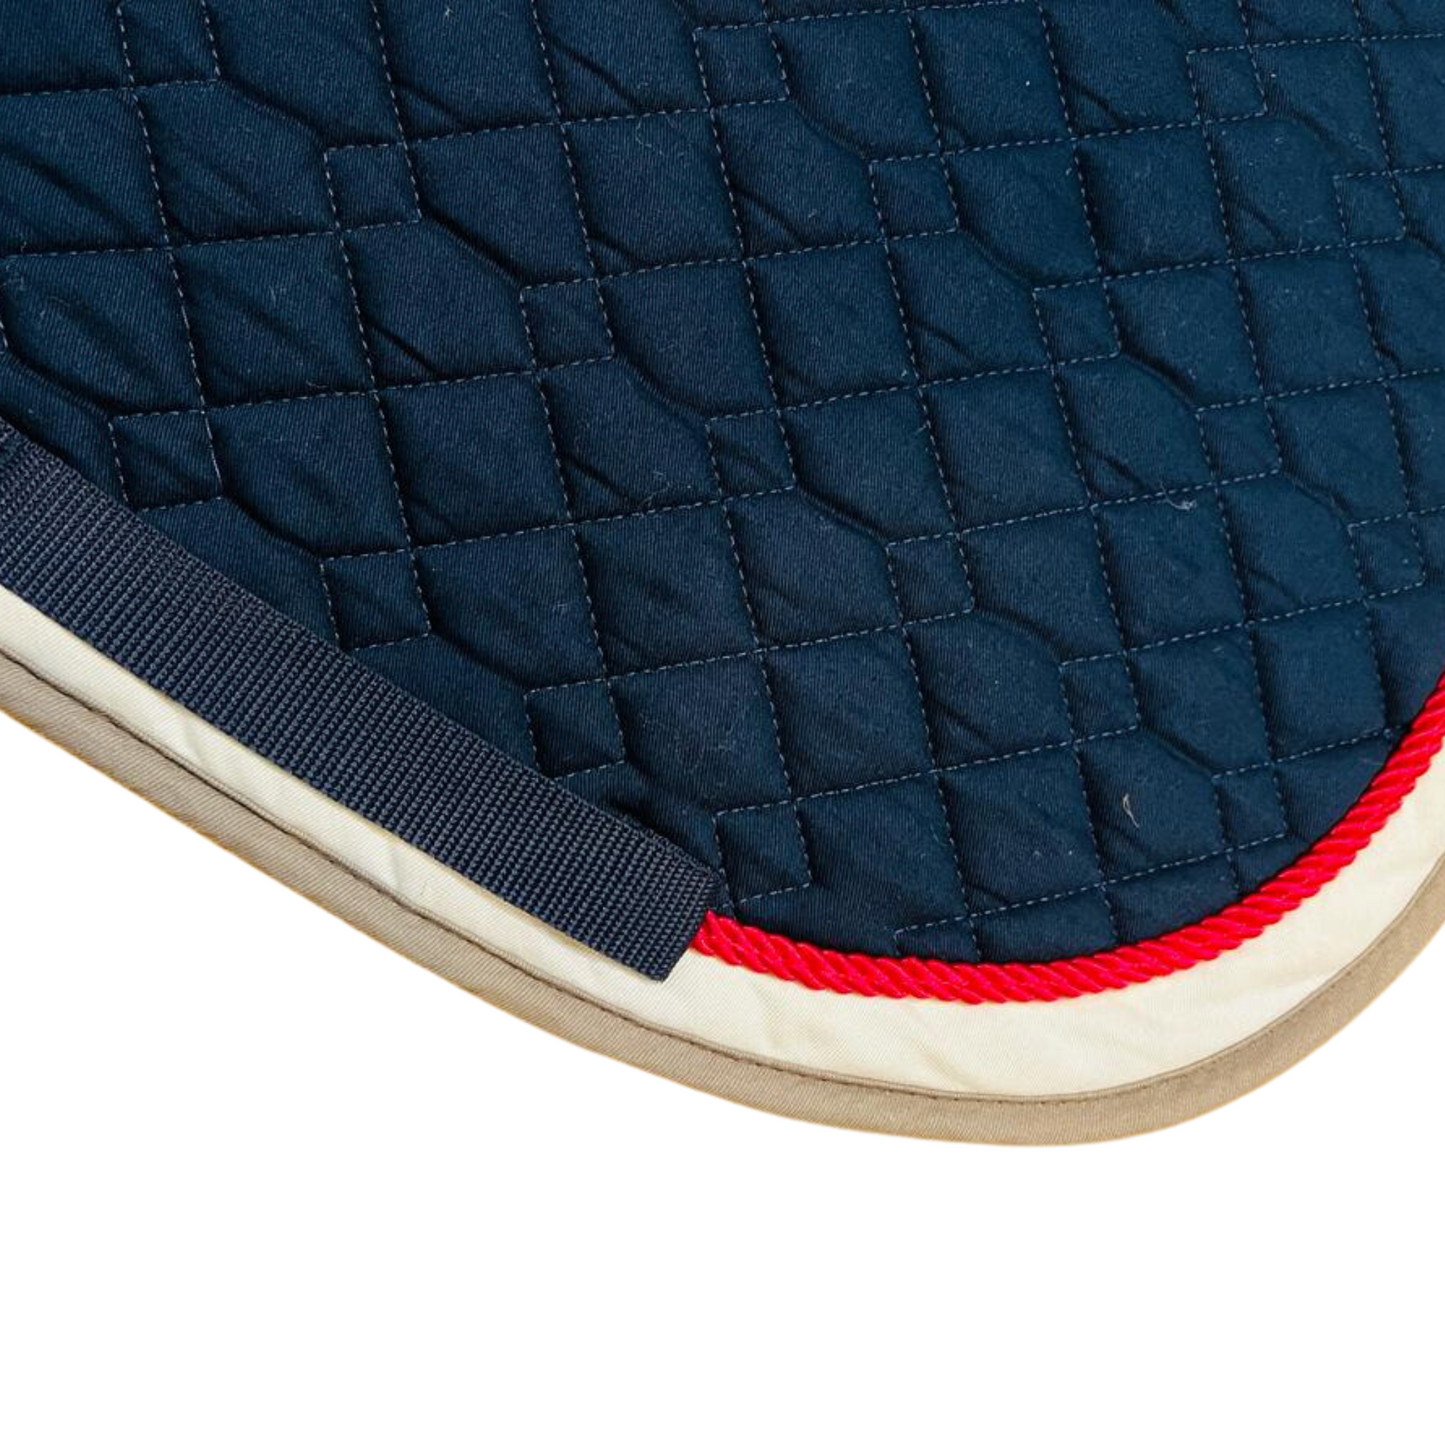 USG || All Purpose Saddle Pad || Red/Navy/Beige ONLY